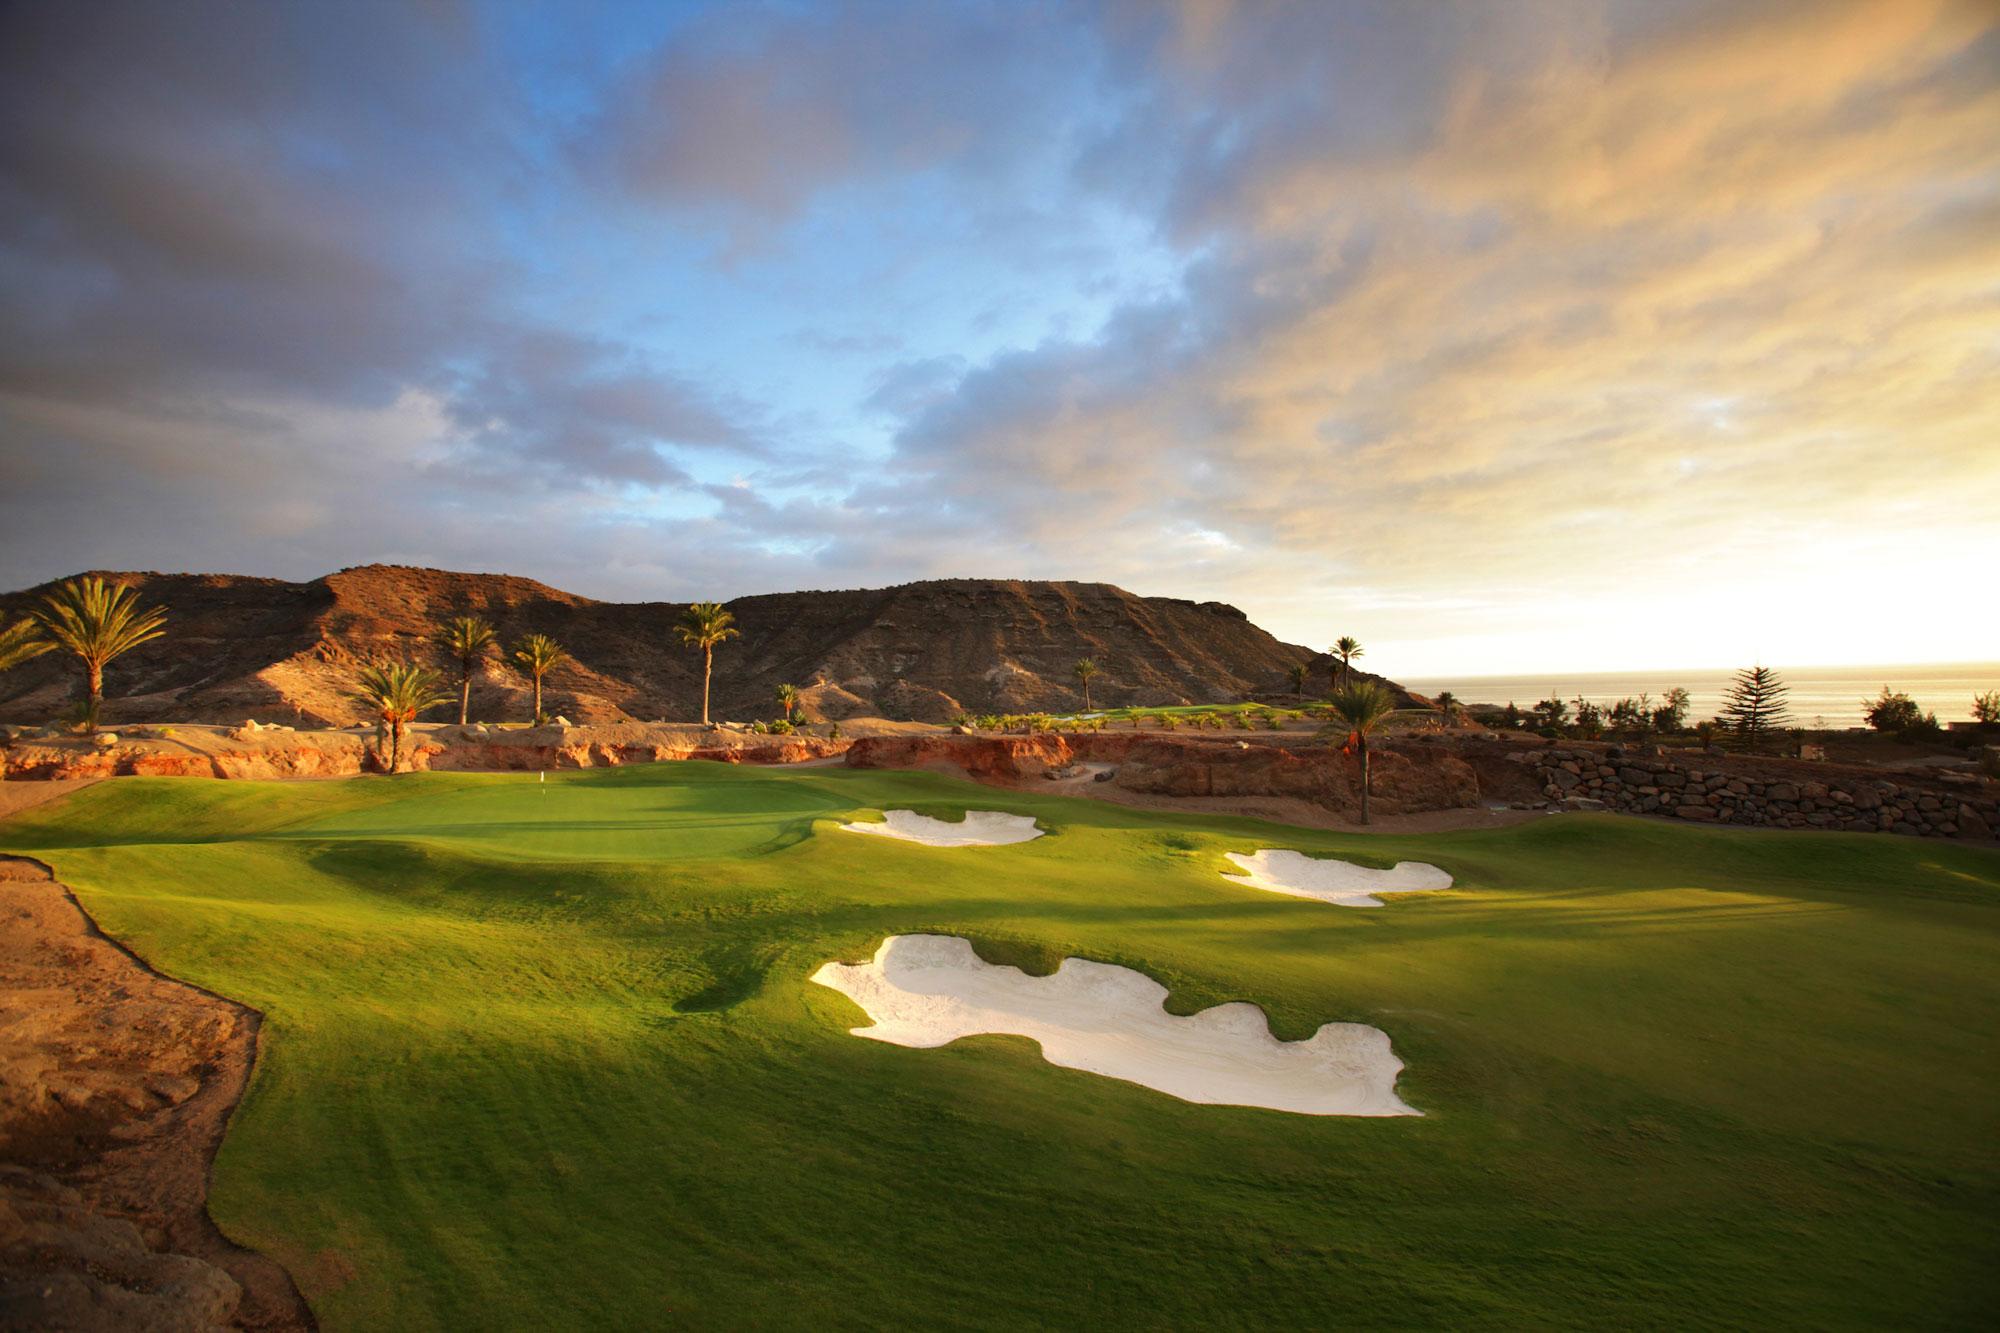 View Anfi Tauro Golf Course's impressive golf course situated in incredible Tenerife.